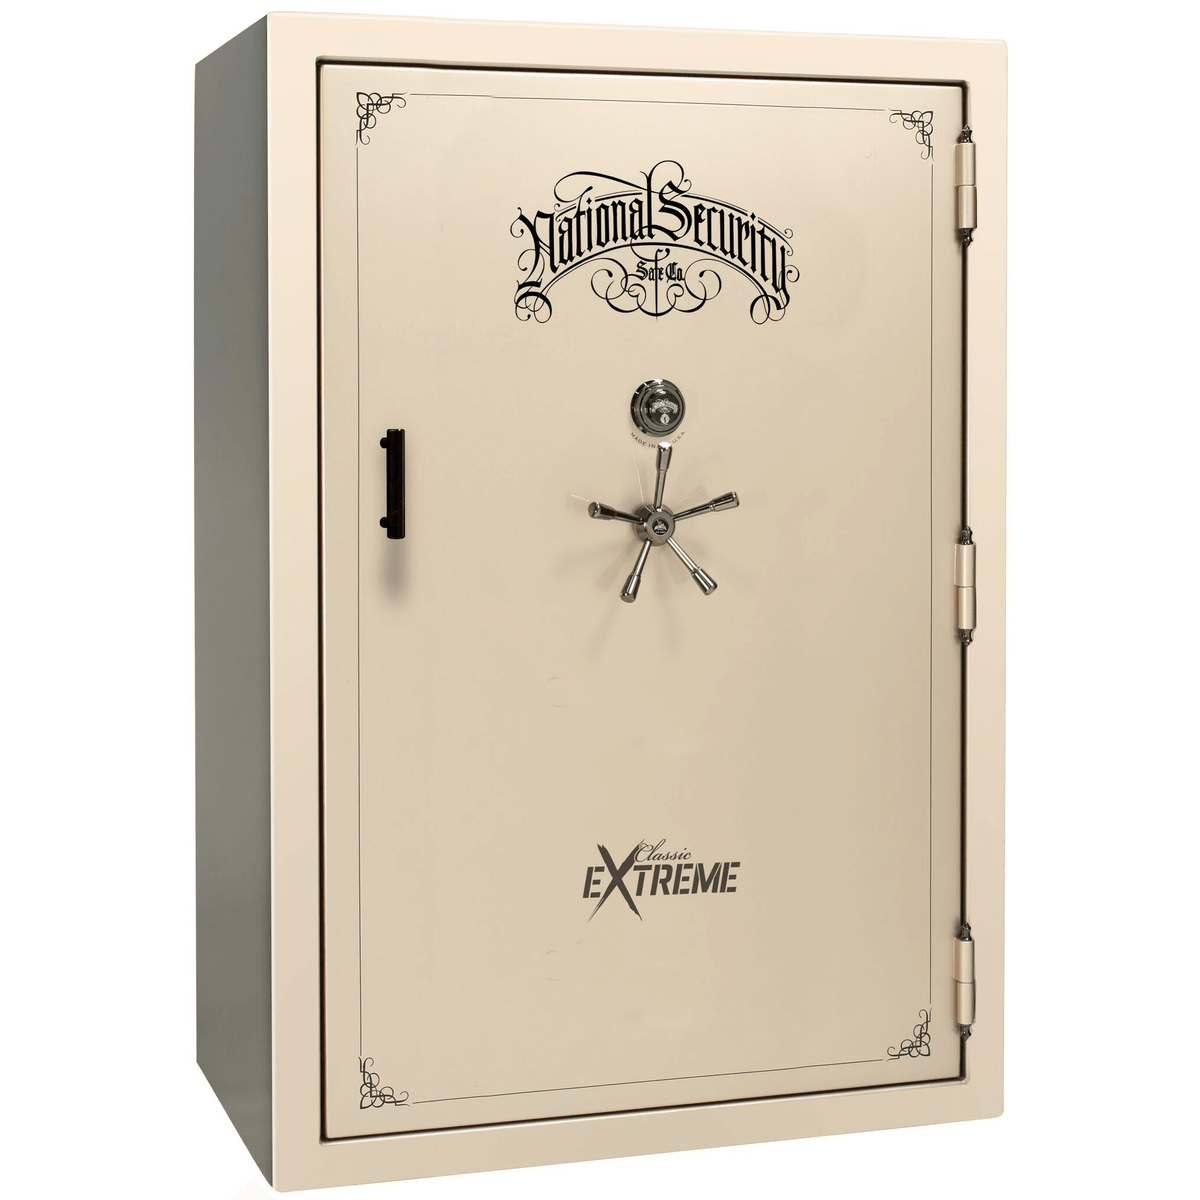 Liberty Classic Select Extreme Wide Body Safe in Champagne Gloss with Black Chrome Mechanical Lock.